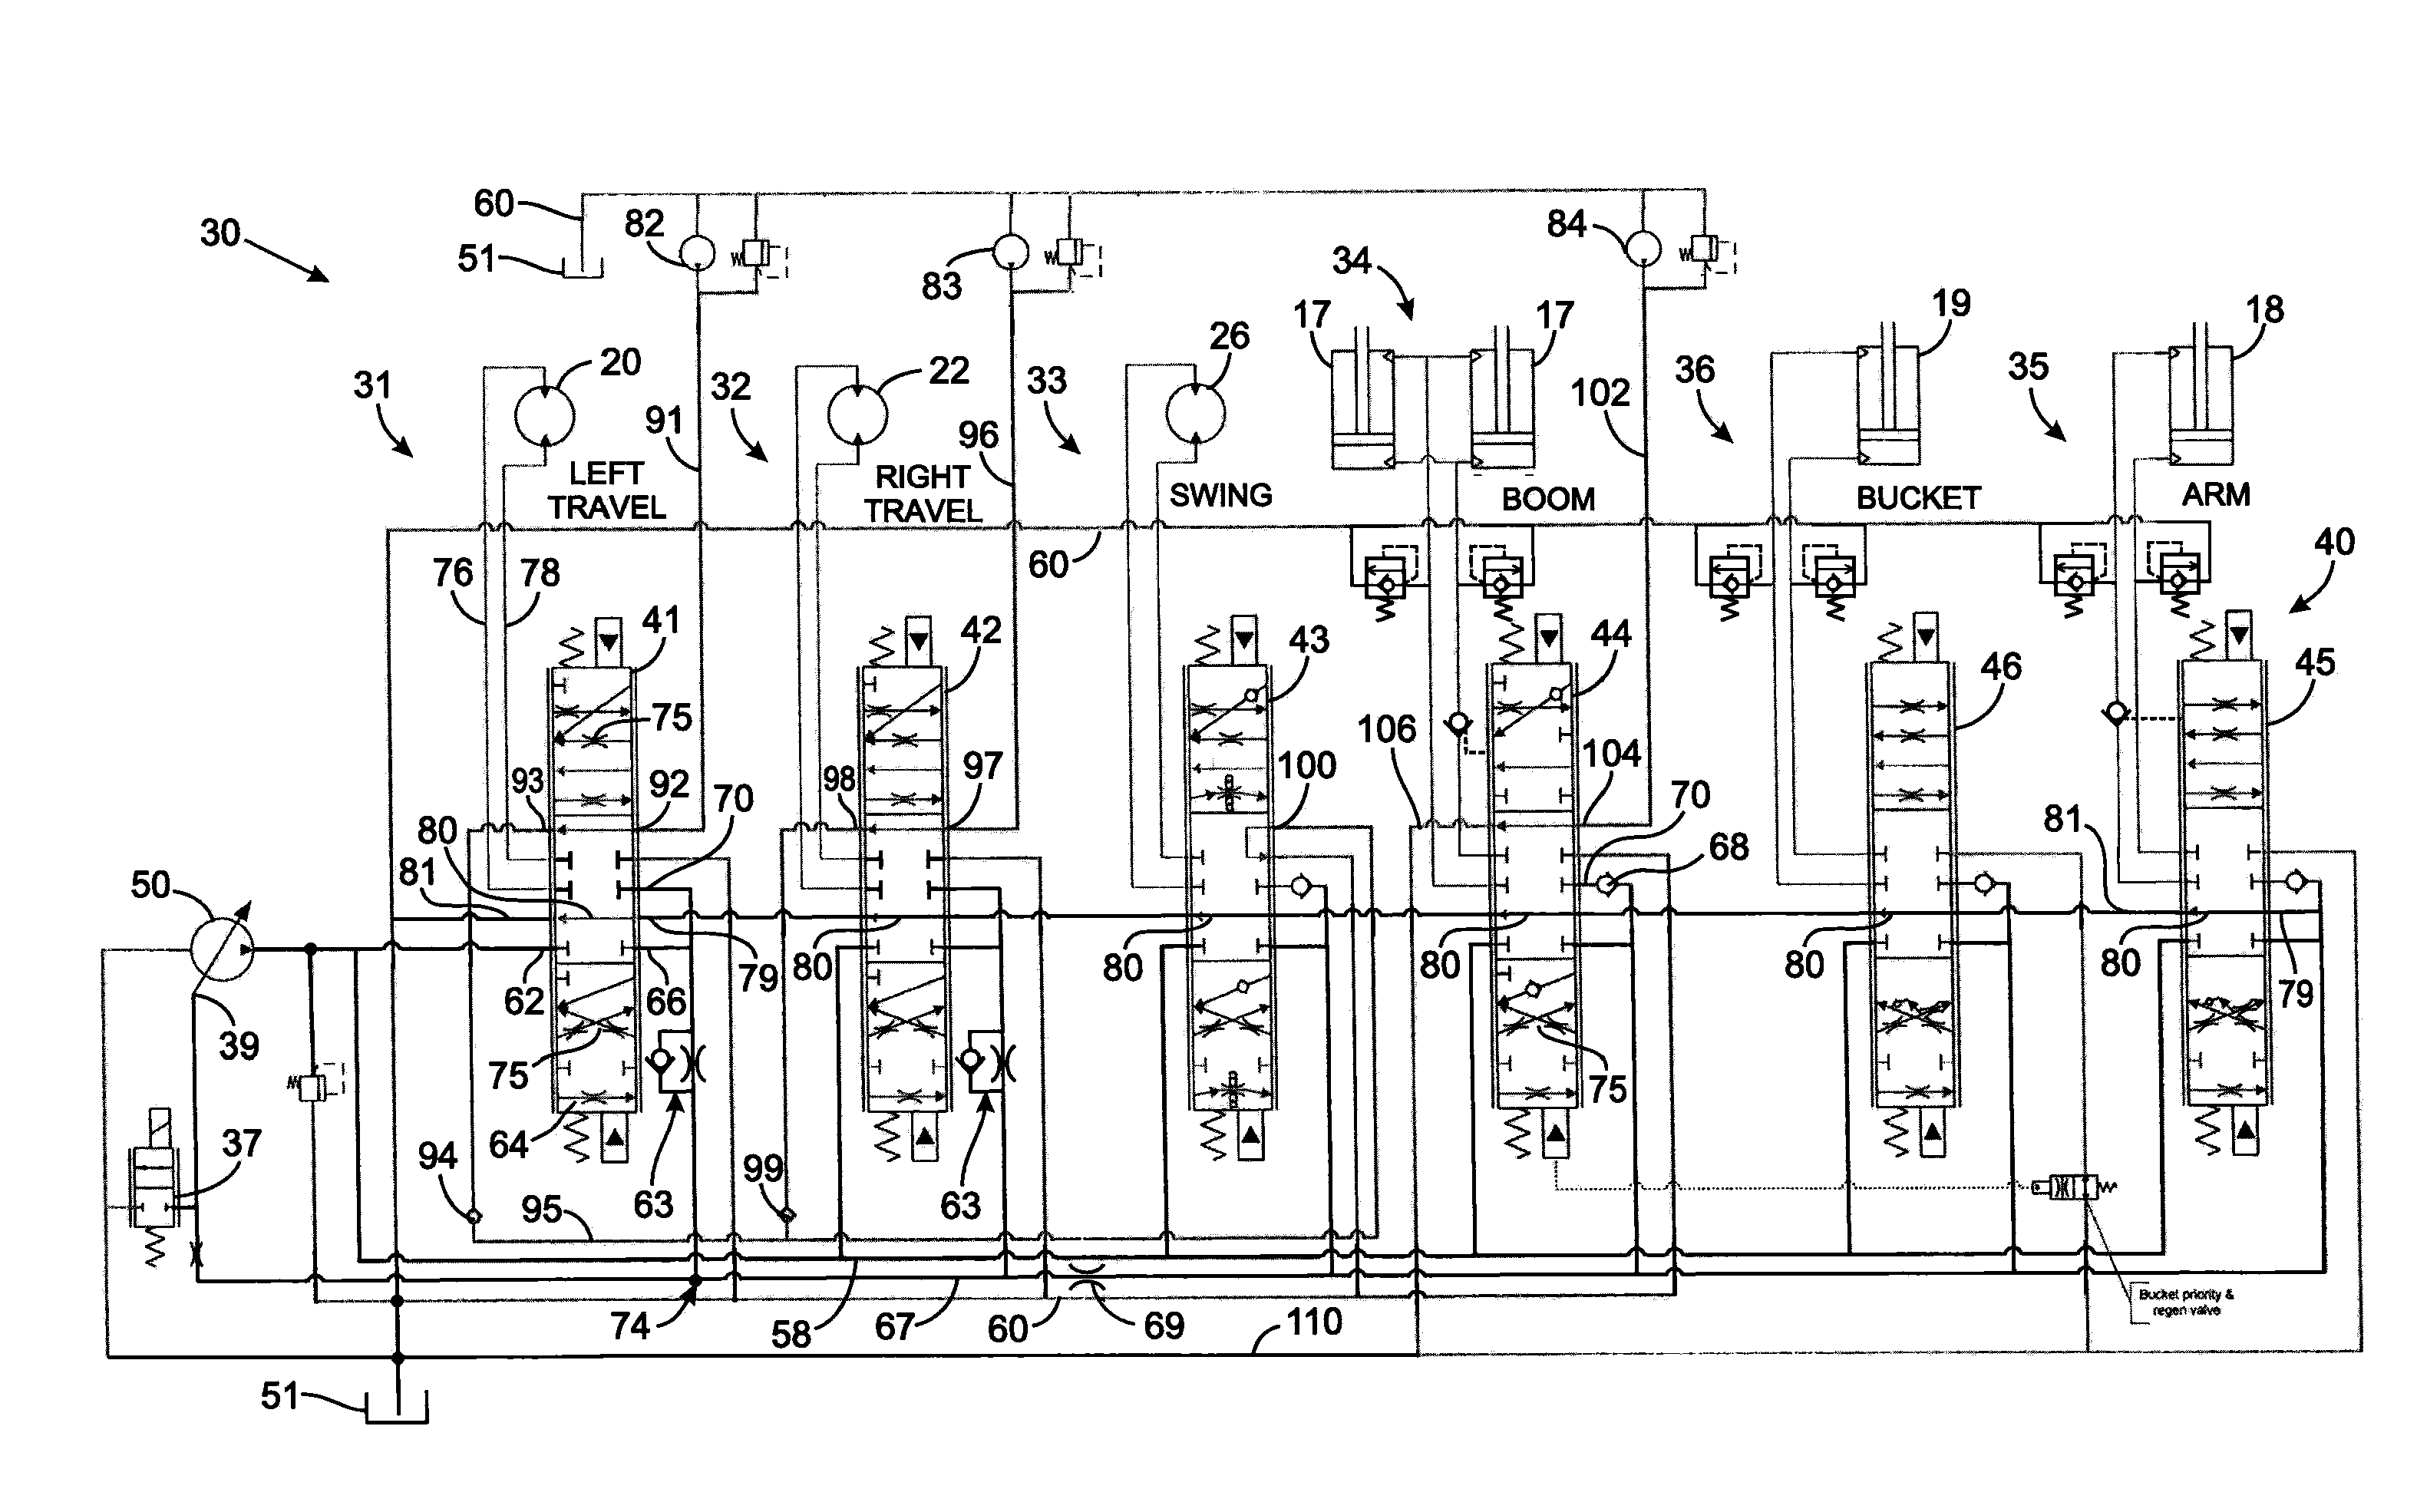 Multiple function hydraulic system with a variable displacement pump and a hydrostatic pump-motor